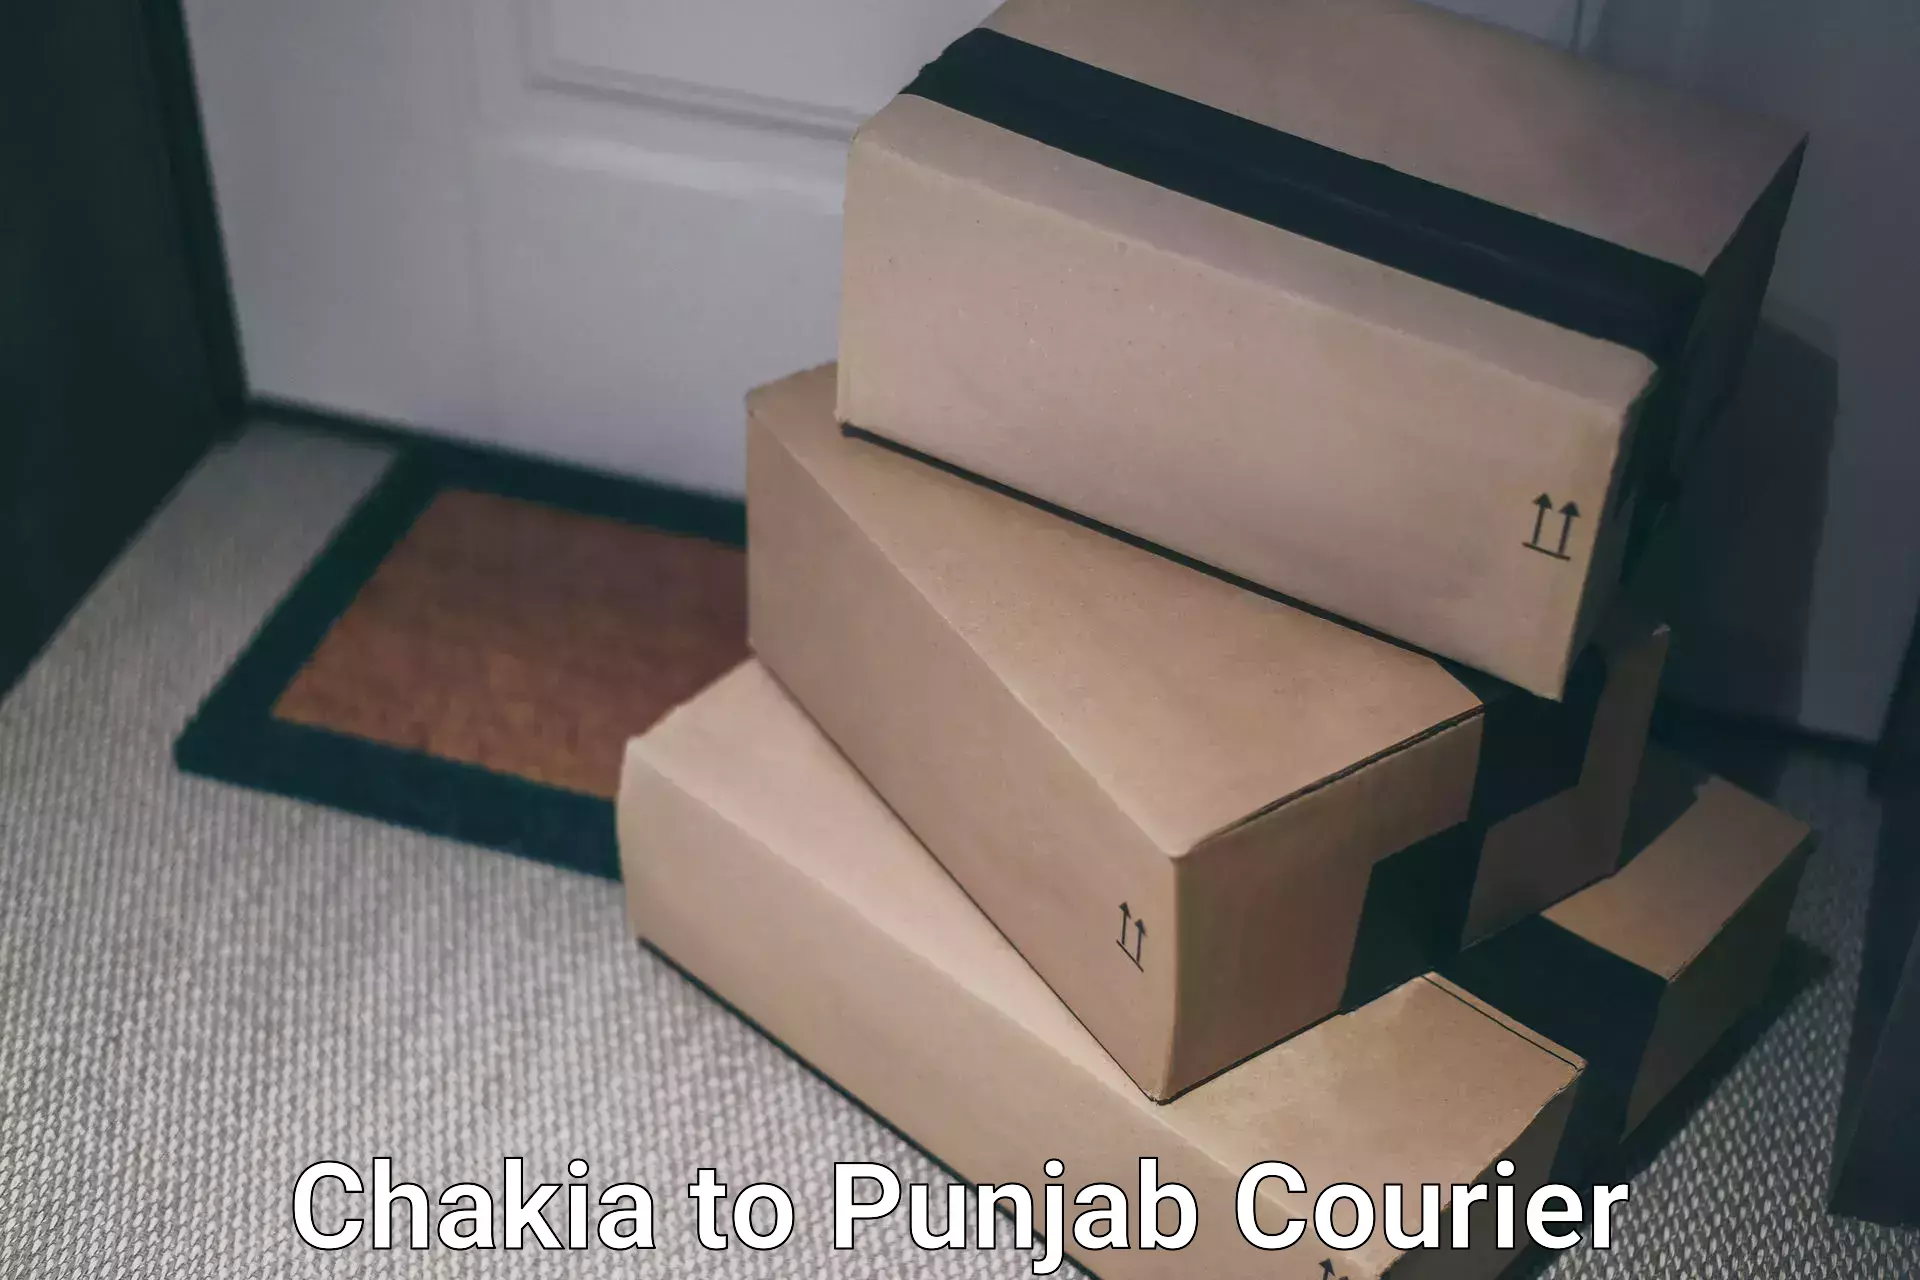 Diverse delivery methods in Chakia to Tarsikka